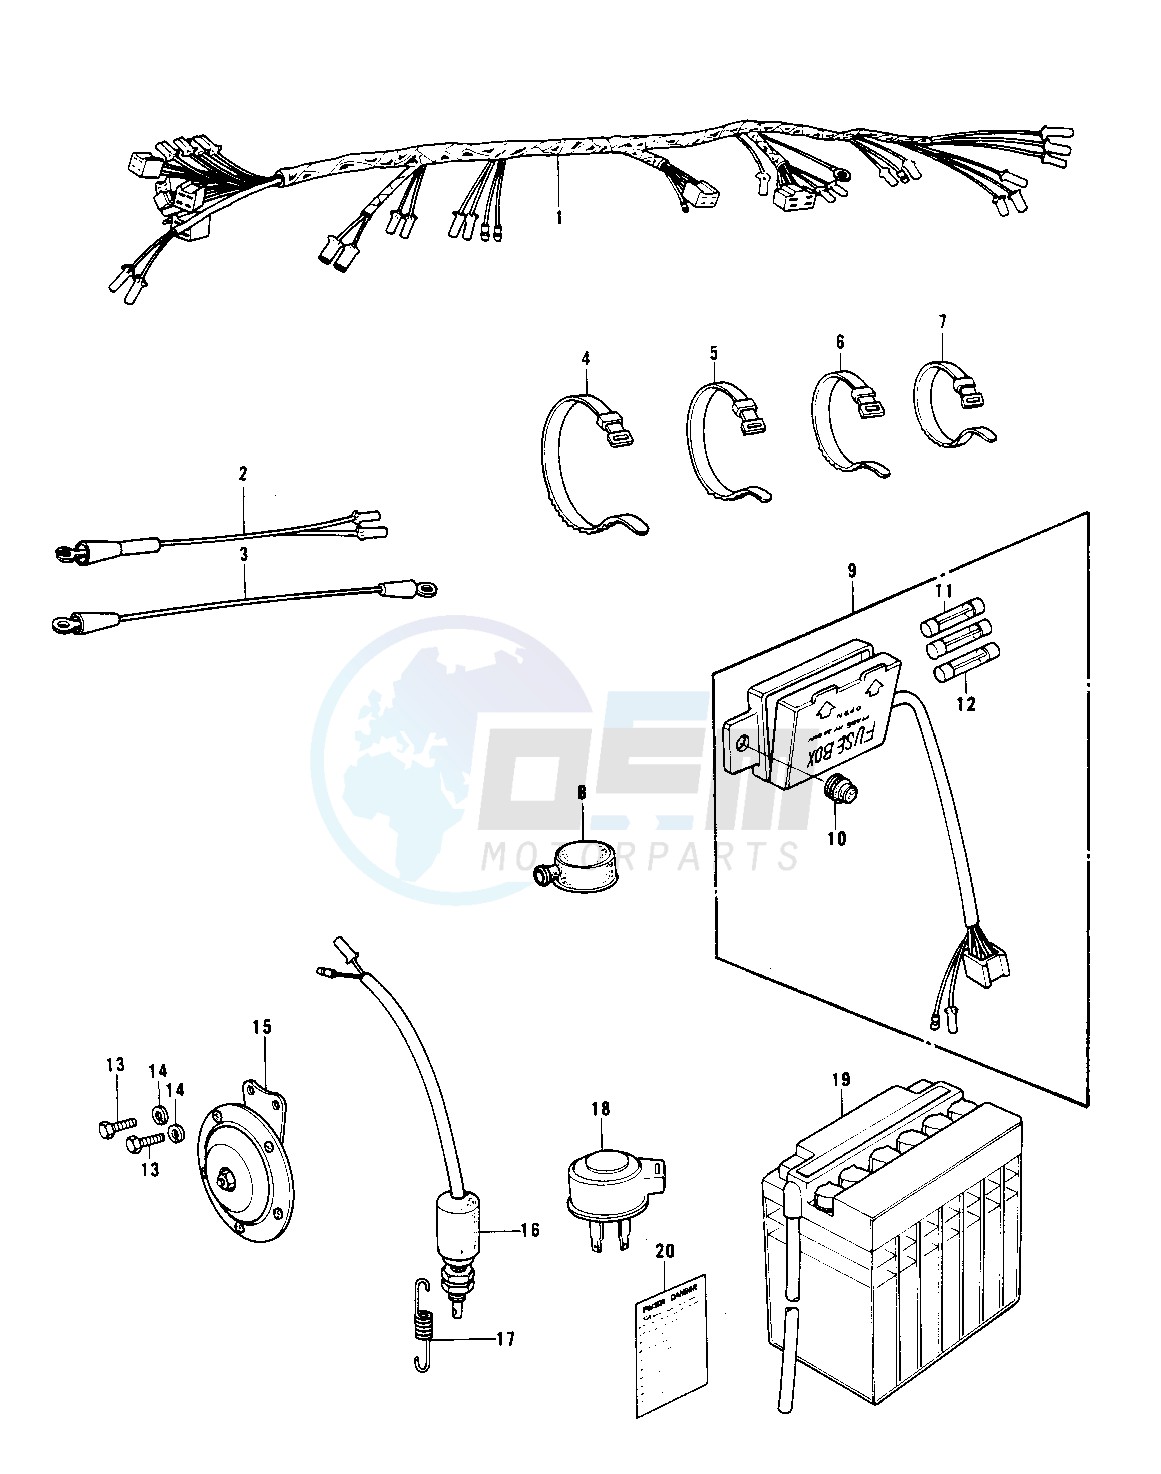 CHASSIS ELECTRICAL EQUIPMENT -- KH250-A5- - blueprint